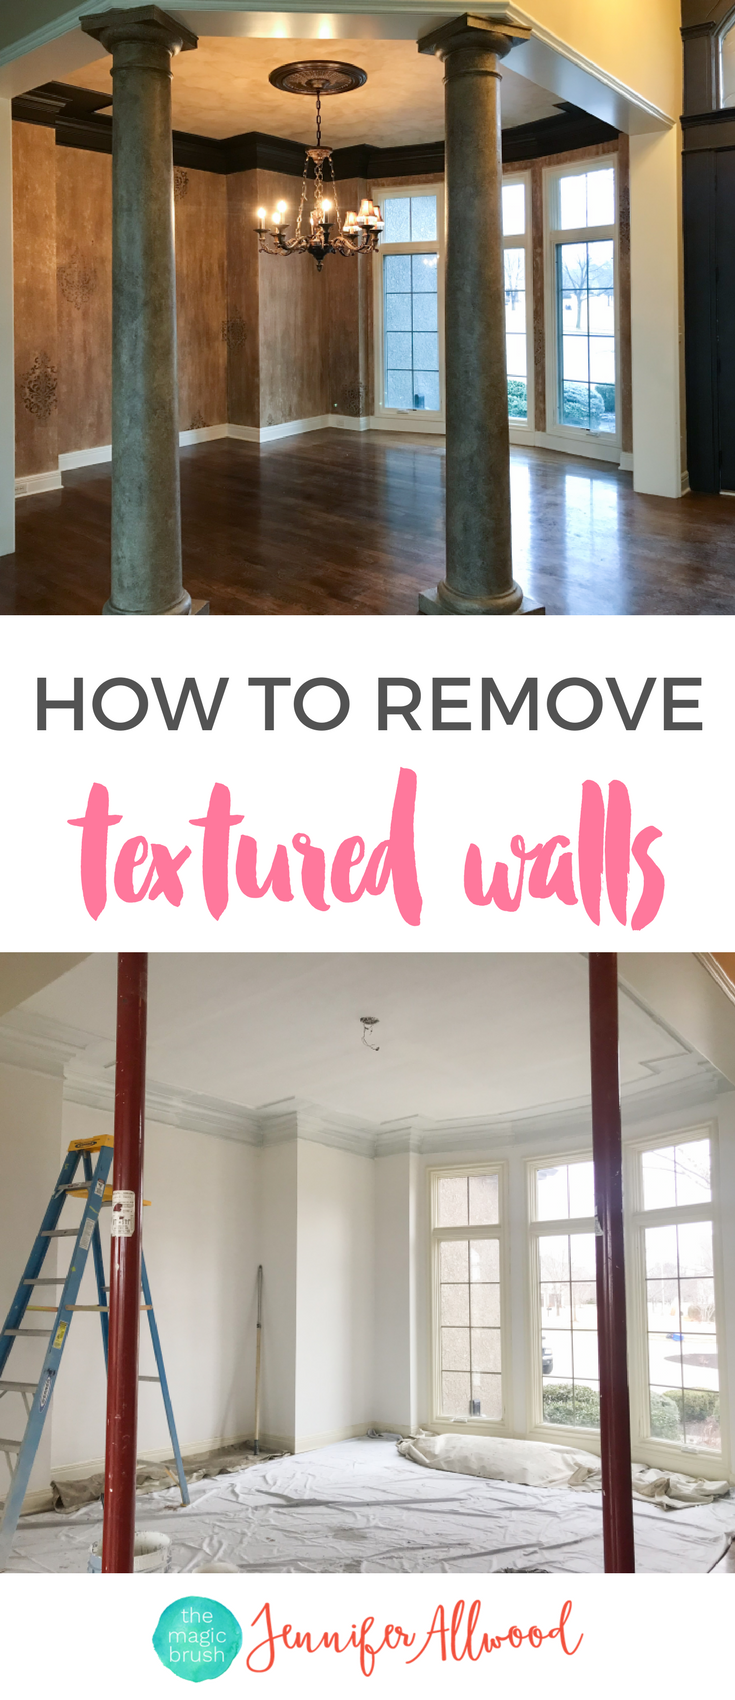 How to Remove Textured Walls and How to Smooth Textured Faux Finishes Jennifer Allwood themagicbrushinc.com #texturedwalls #smoothwalls #removingfauxfinish 